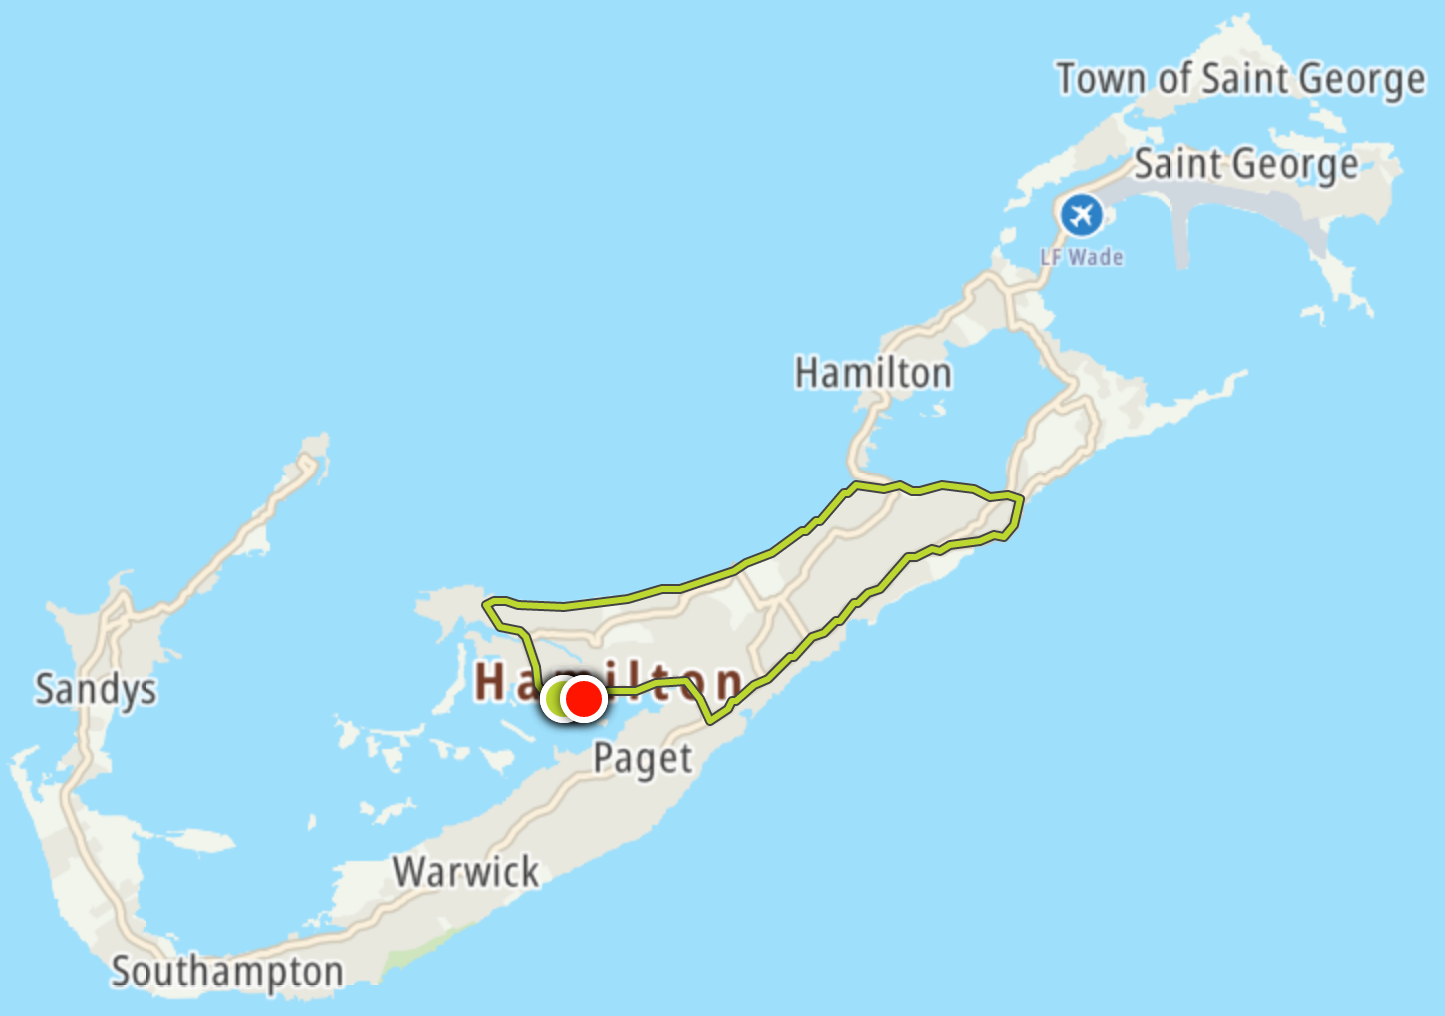 The route my watch tracked during the half-marathon in Bermuda